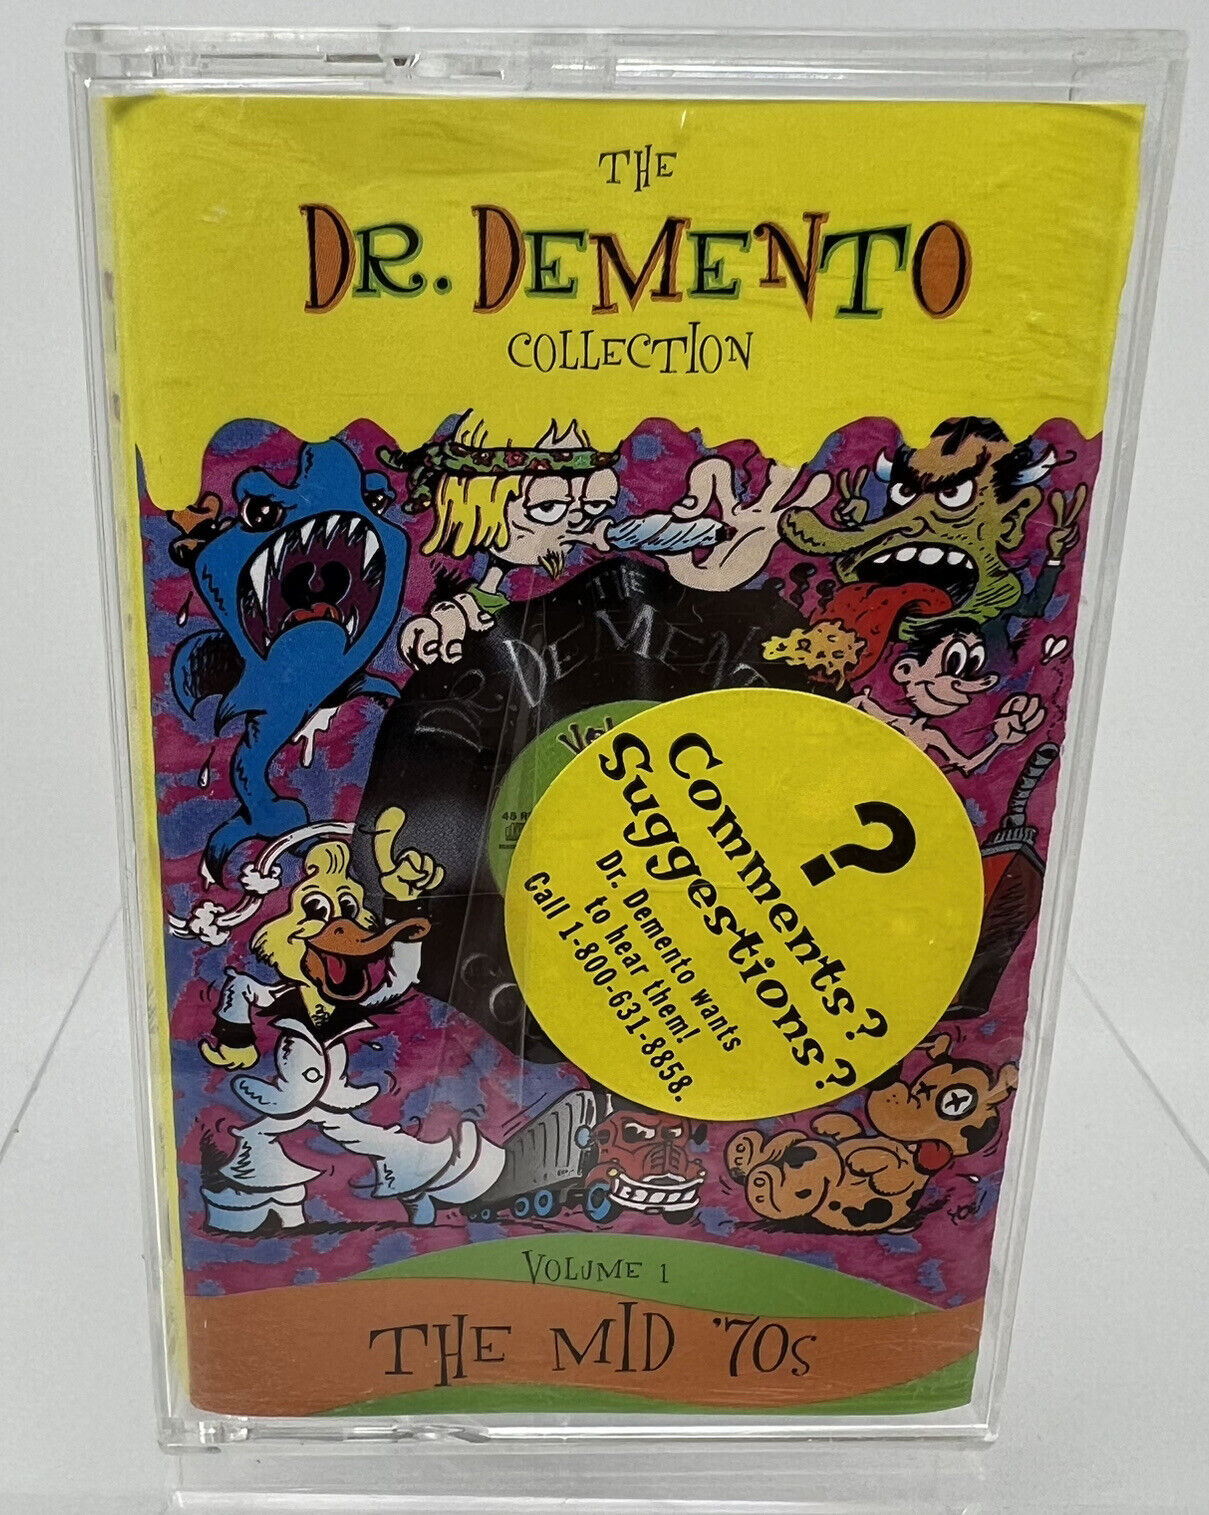 VTG. The Dr Demento Collection Vol 1 The Mid 70s Various Artists 1996 Cassette